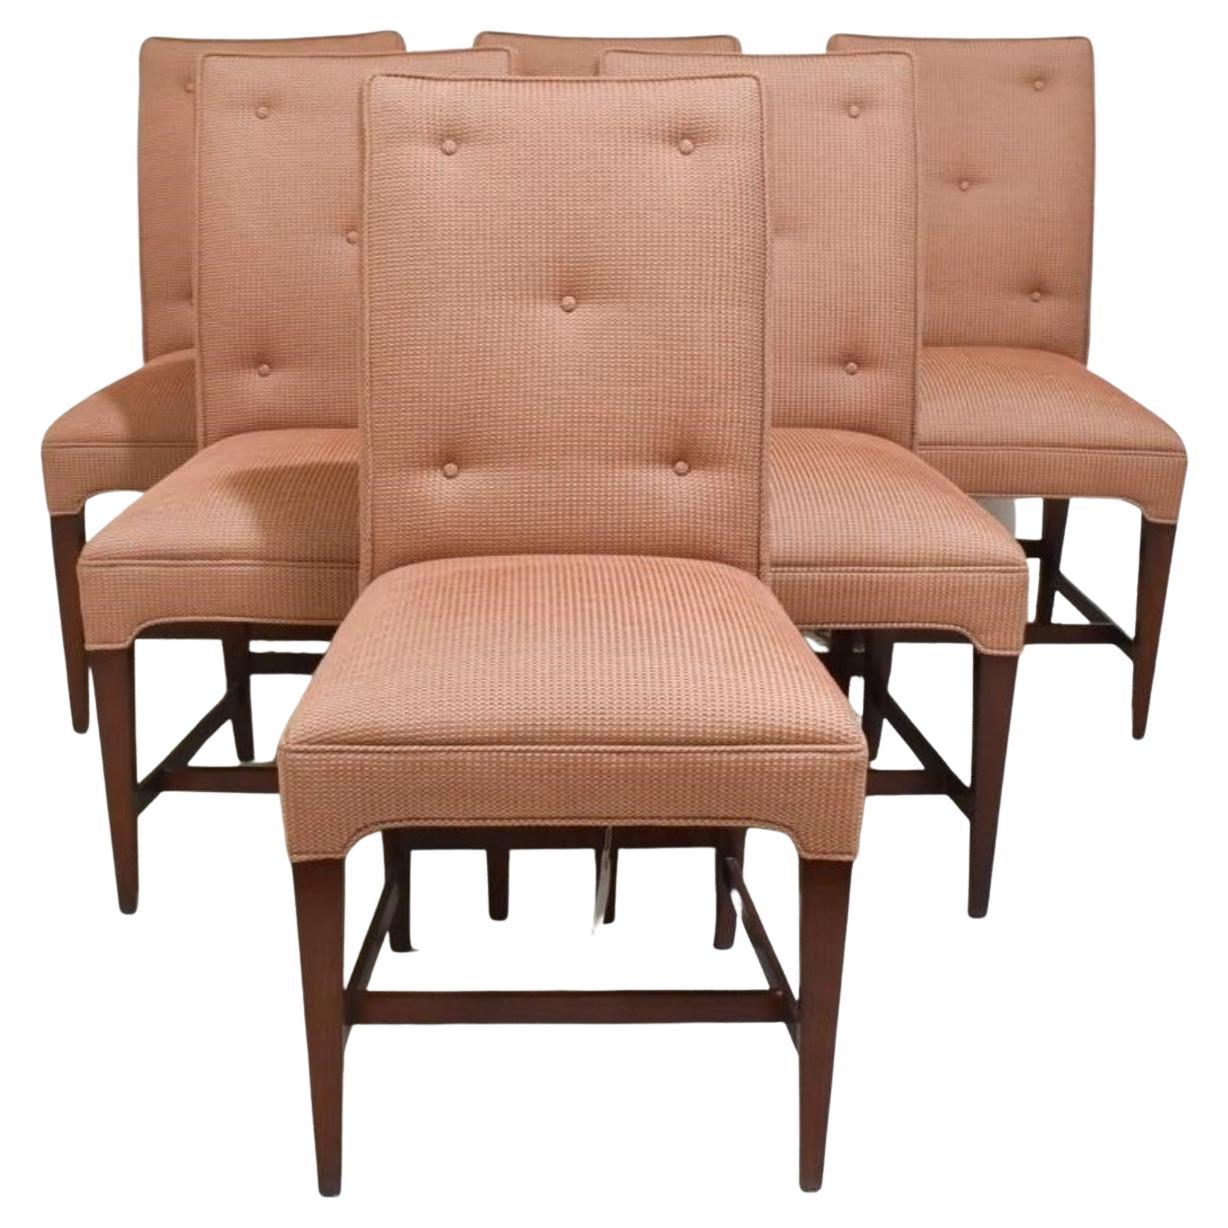 Suite of 6 Elegant Mid-Century Modern Dining Chairs For Sale